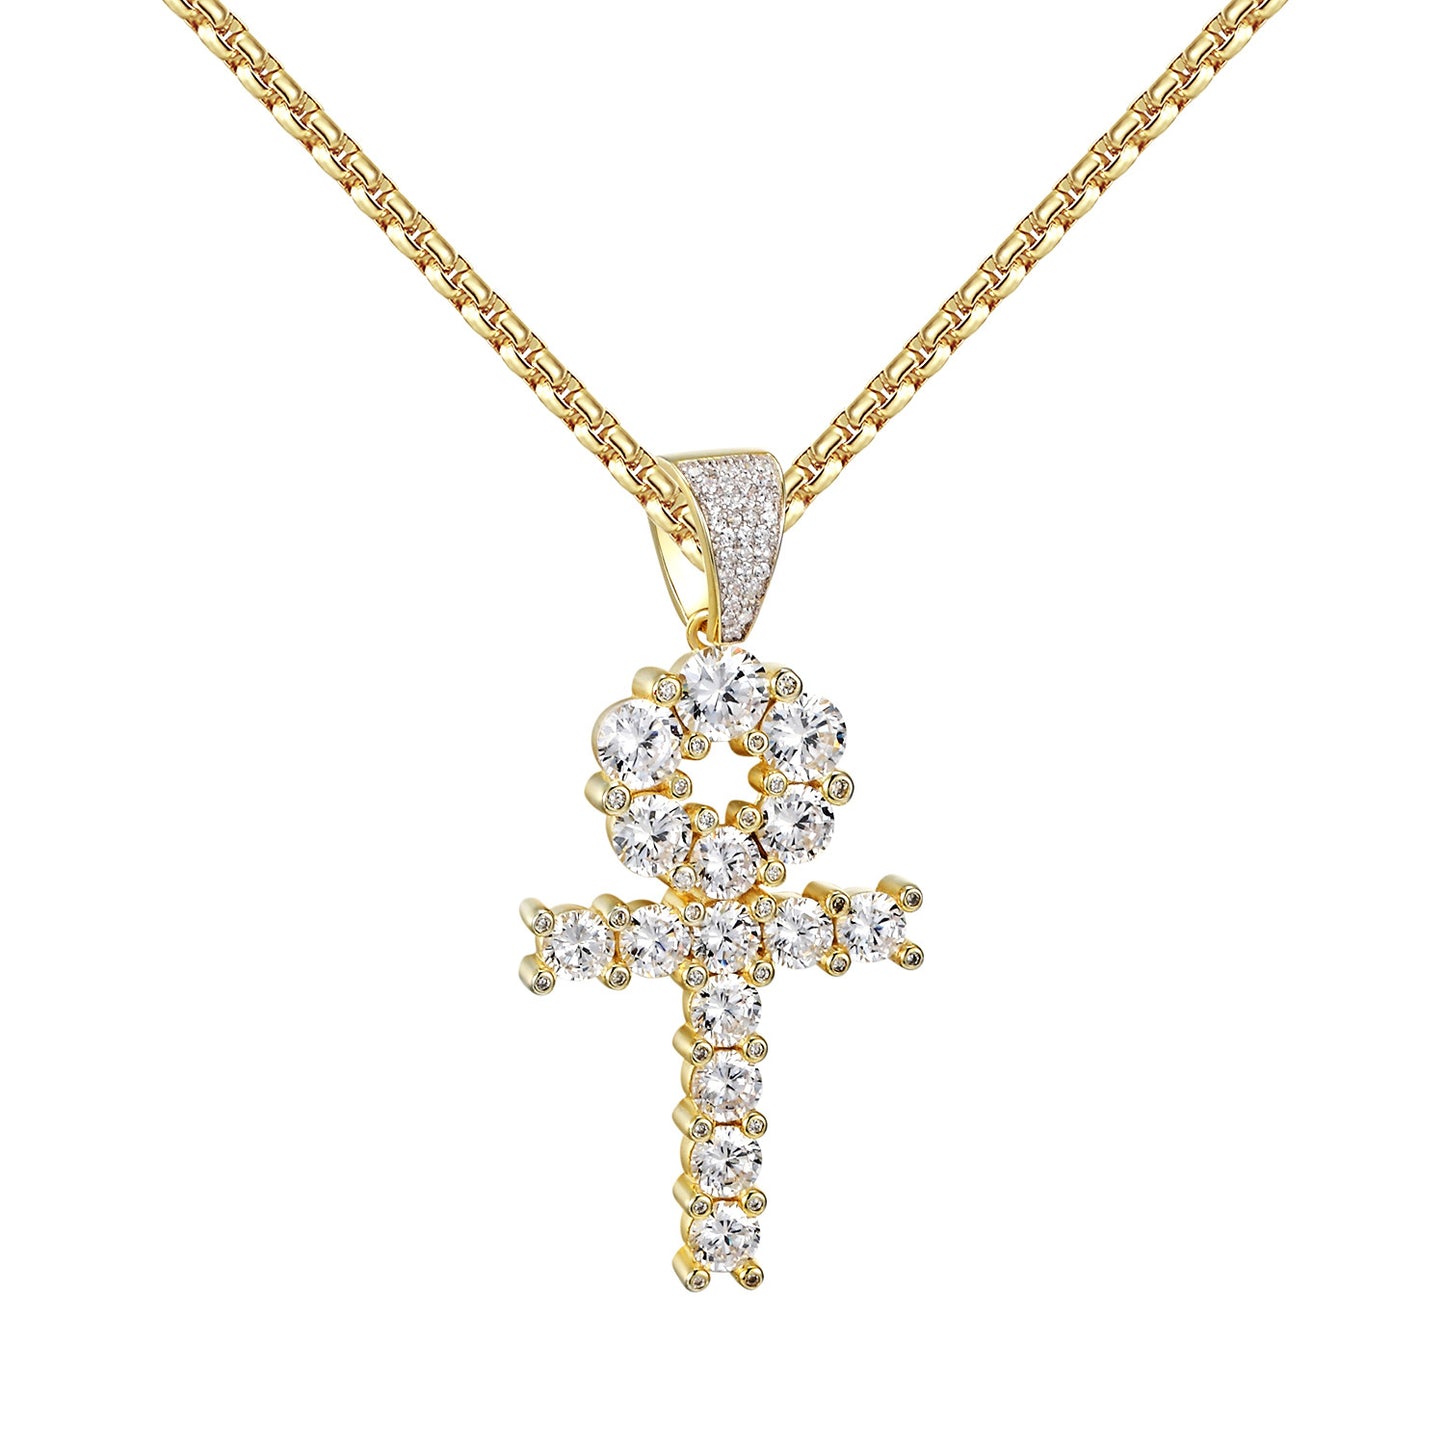 Solitaire Ankh Cross Pendant 14k Gold Over 925 Silver Round Cut Box Necklace 24"